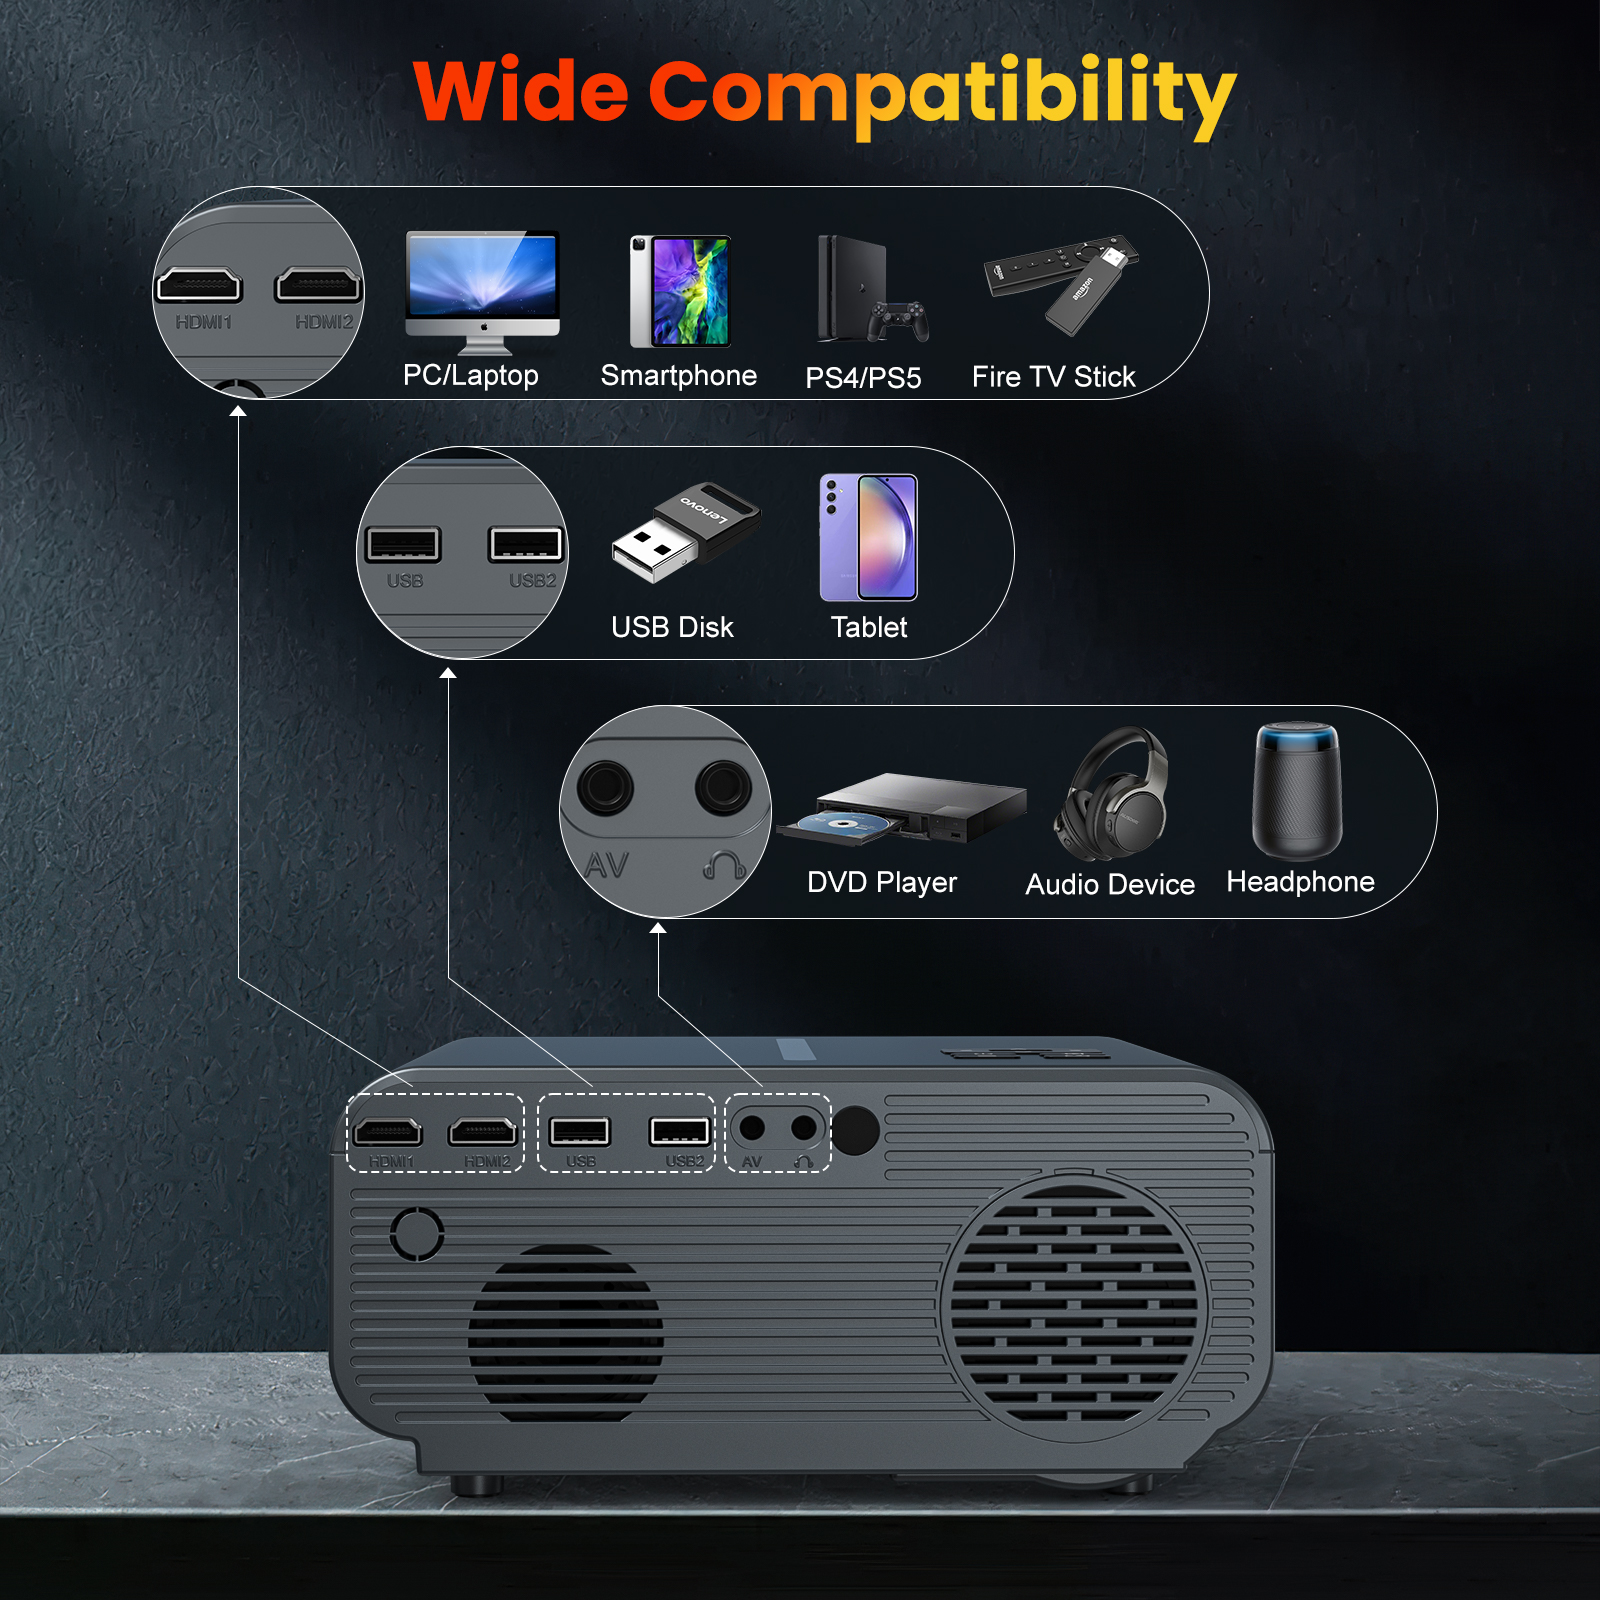 Auto Focus] HAPPRUN Projector, Projector with WiFi and Bluetooth